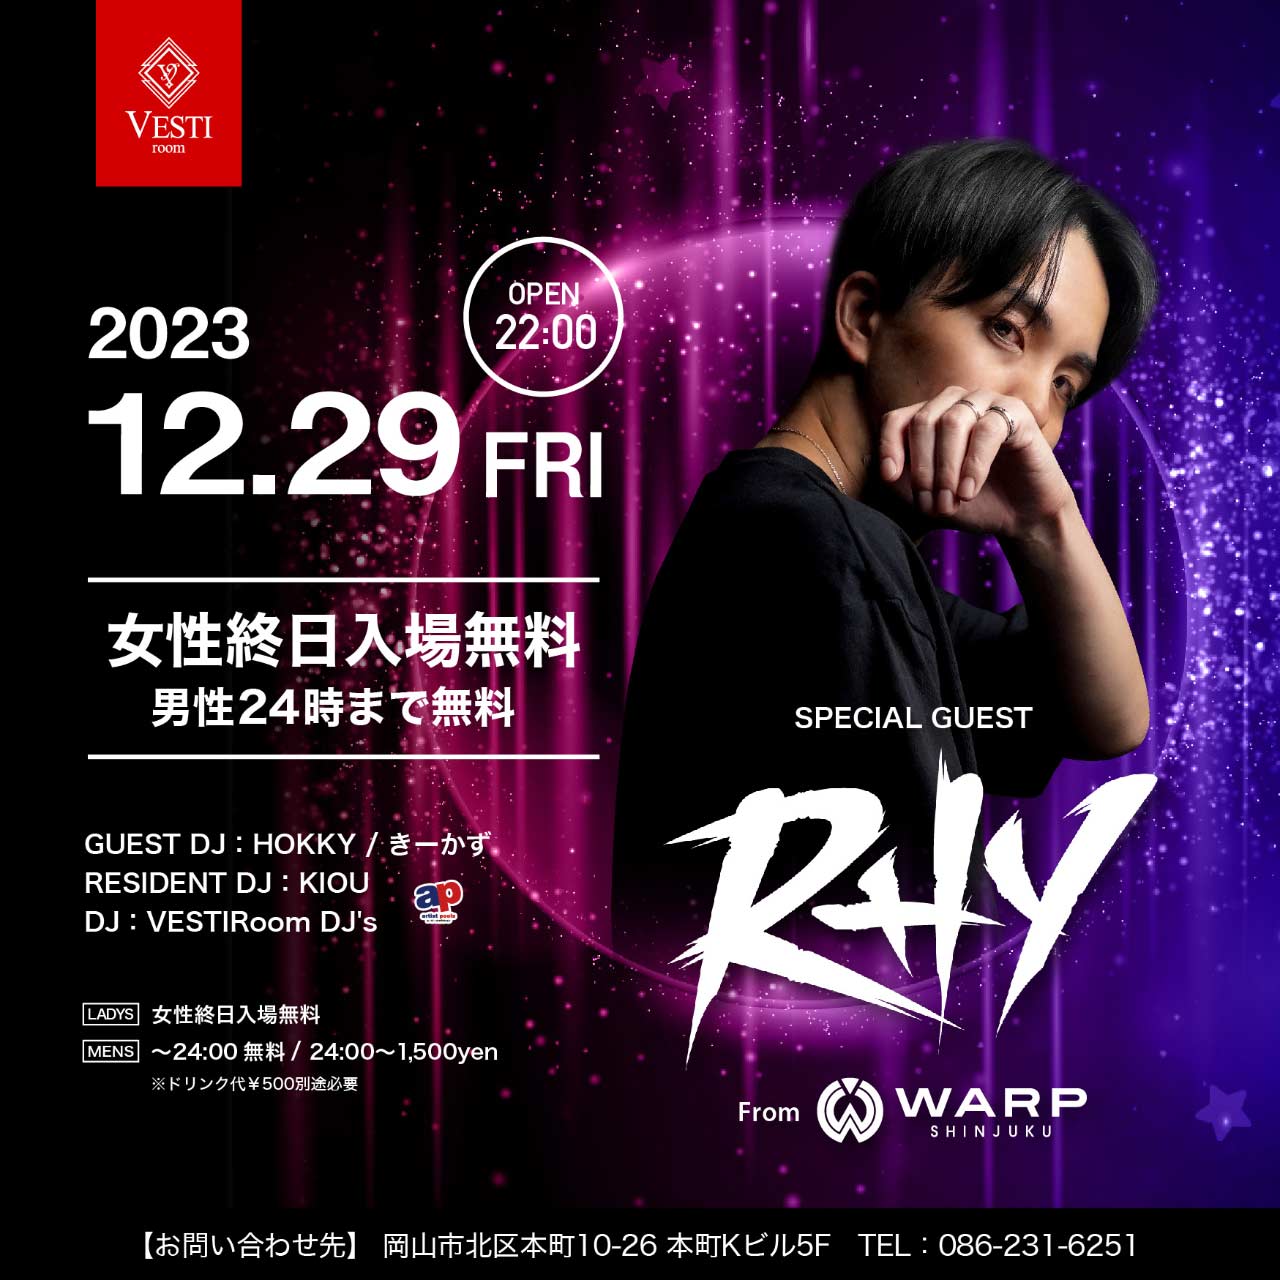 SPECIAL GUEST : RHY 〜女性終日入場無料〜